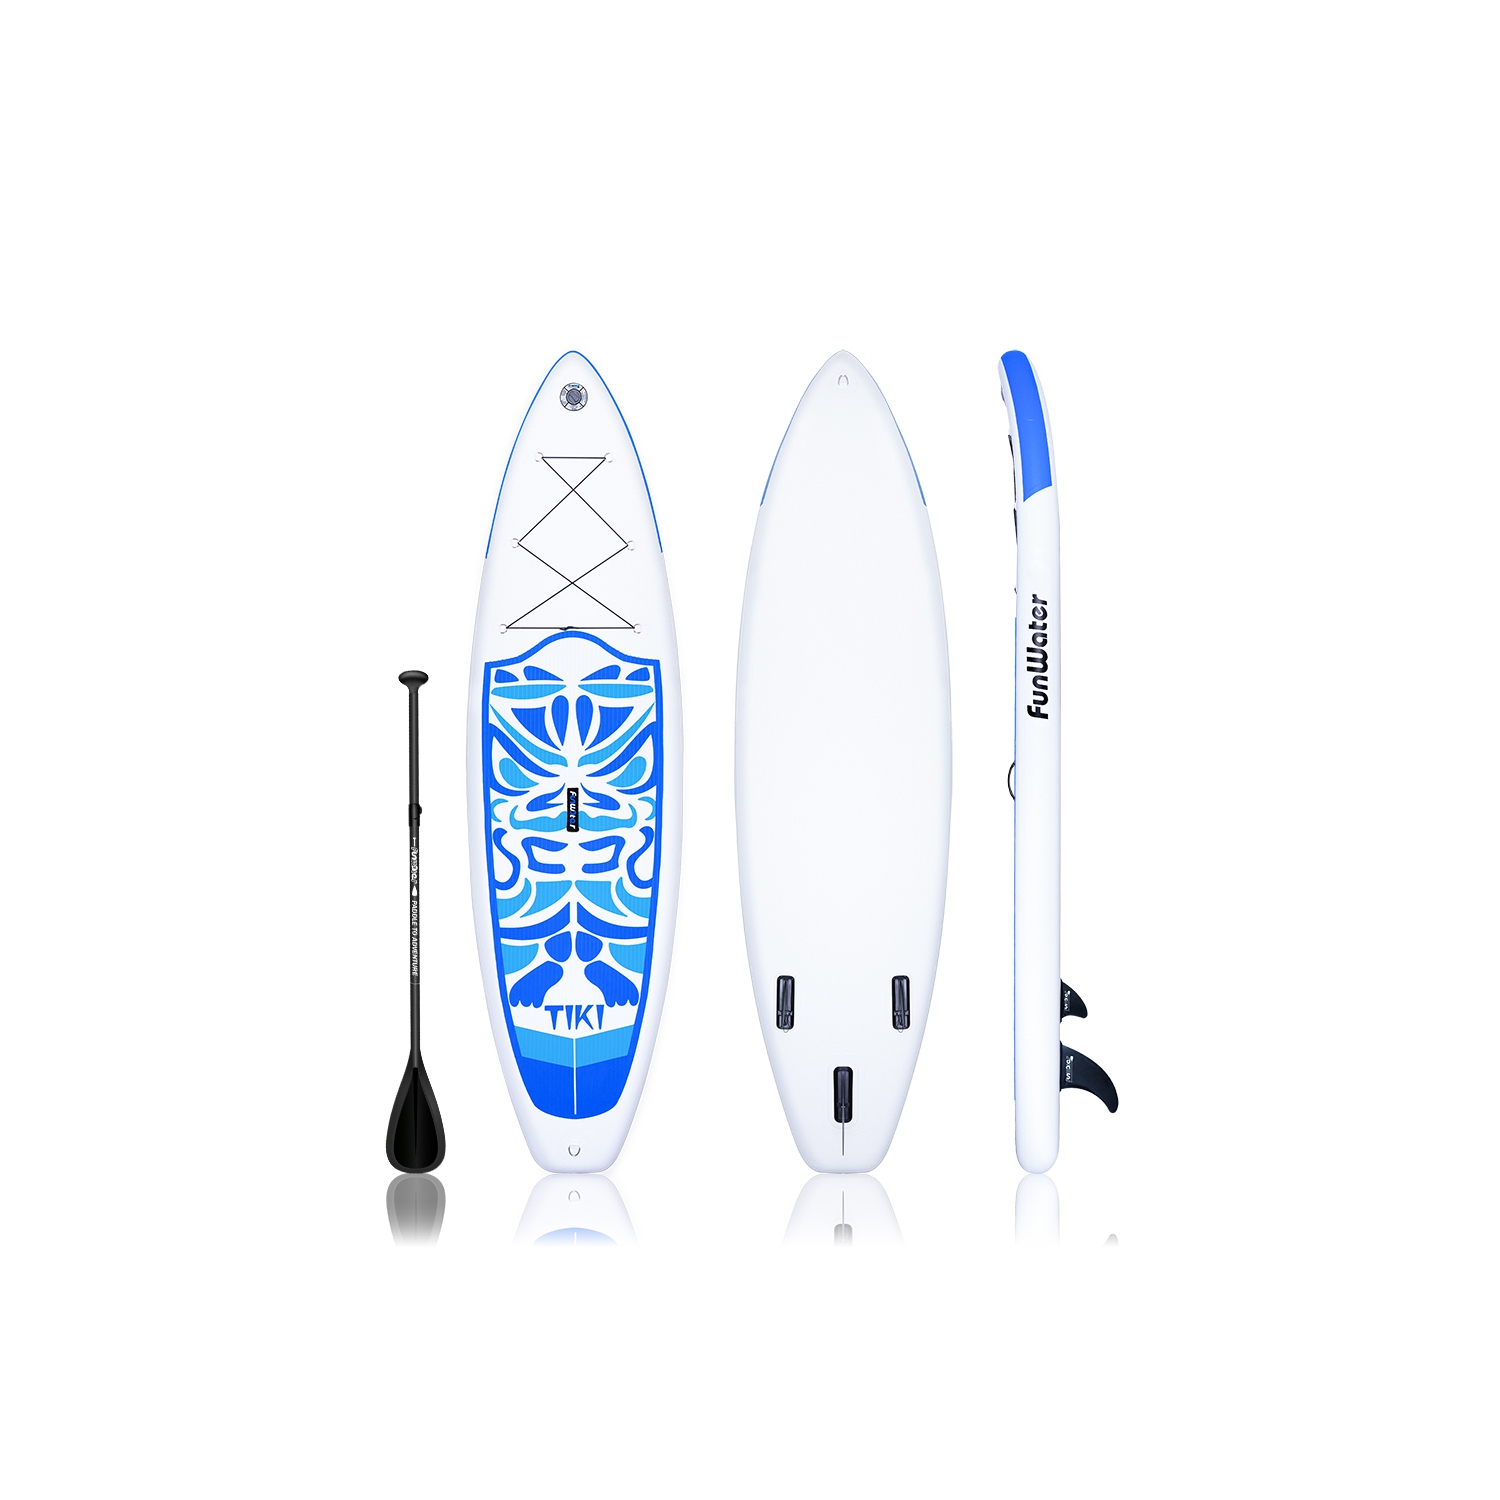 FunWater Inflatable Ultra-Light (17.6lbs) SUP for All Skill Levels Everything -Classic TIKI Blue